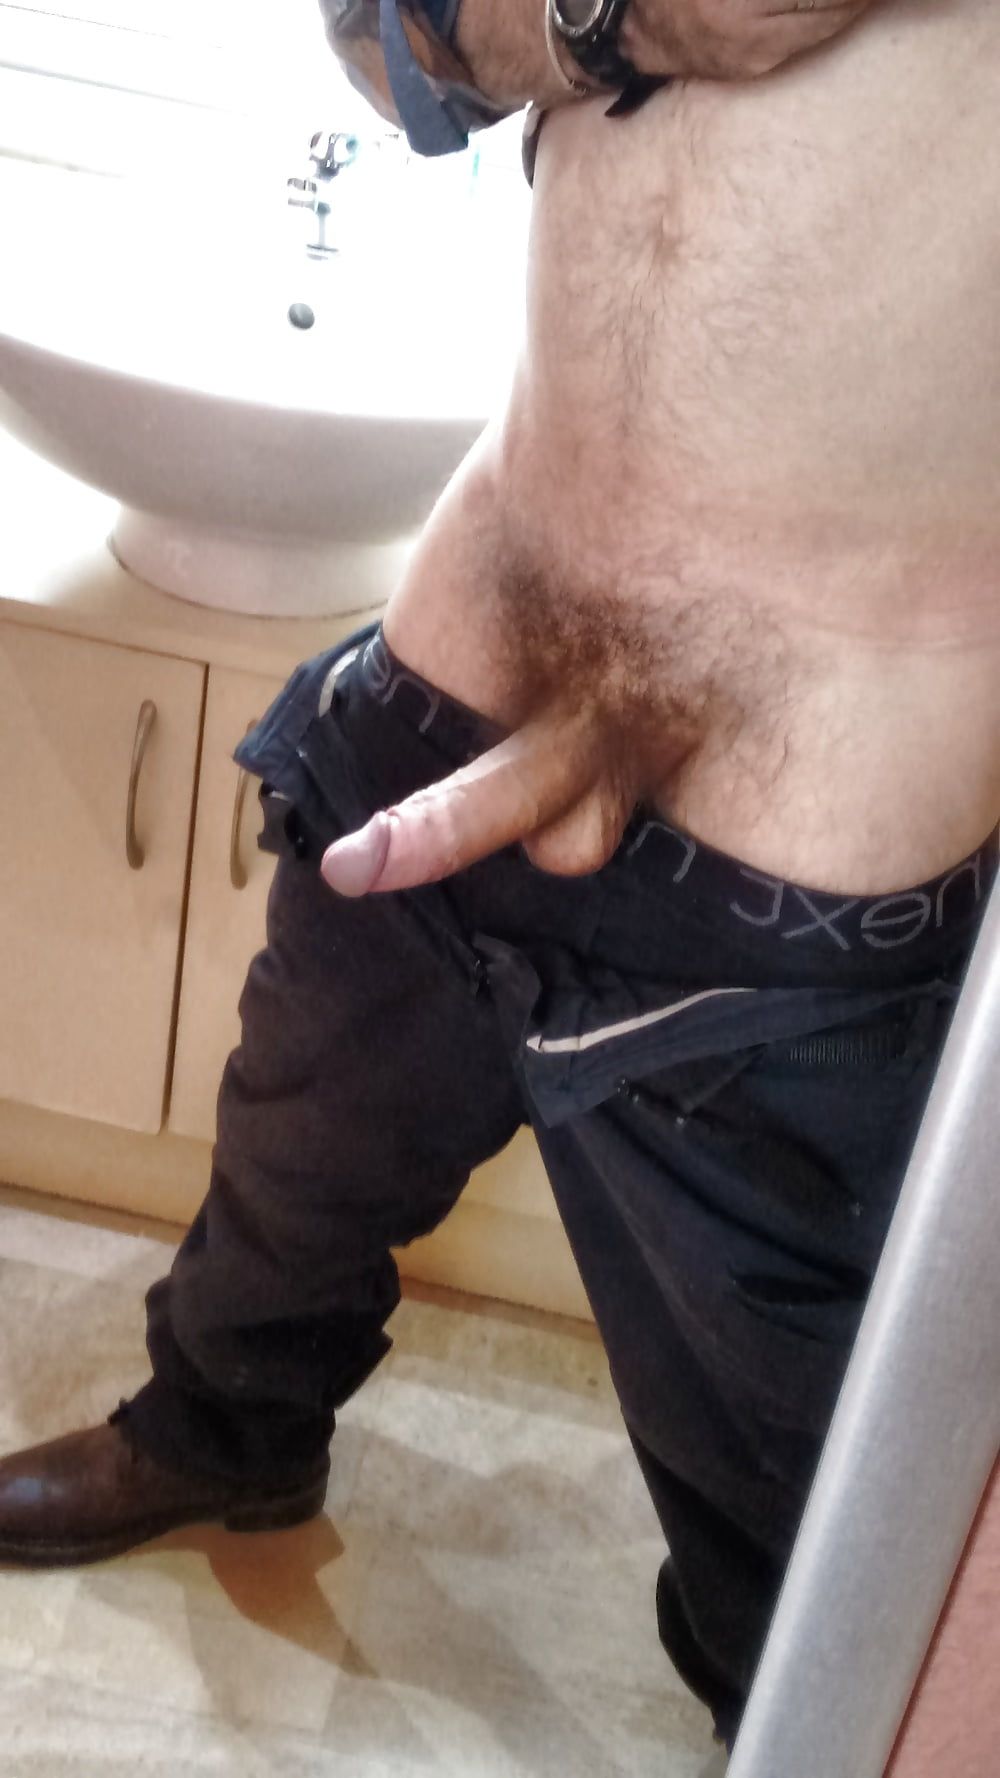 Thick 50 yr old cock, comment please #9